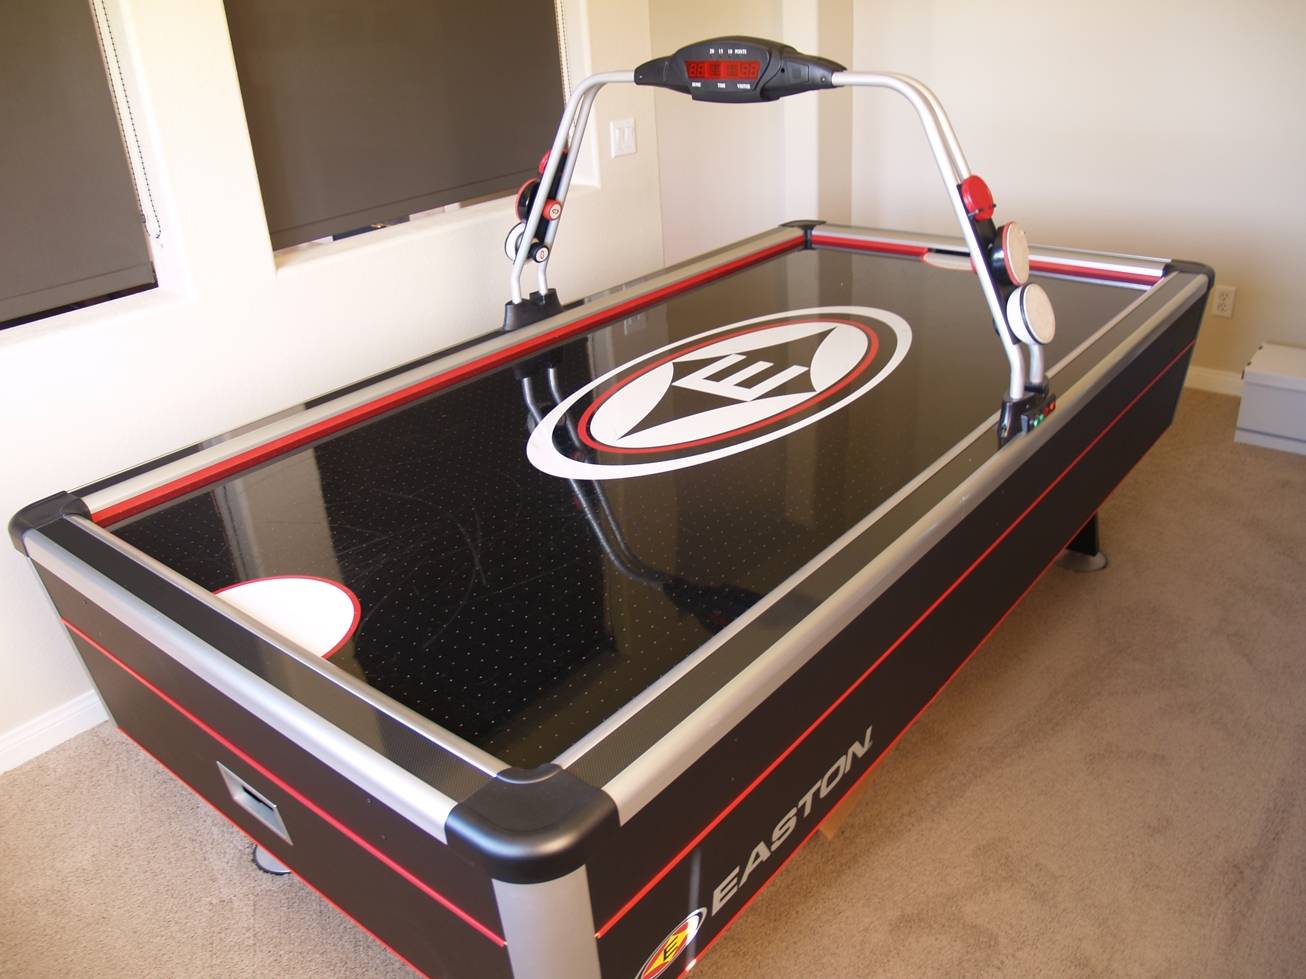 Easton 8 Carbon Air Hockey Table in a room